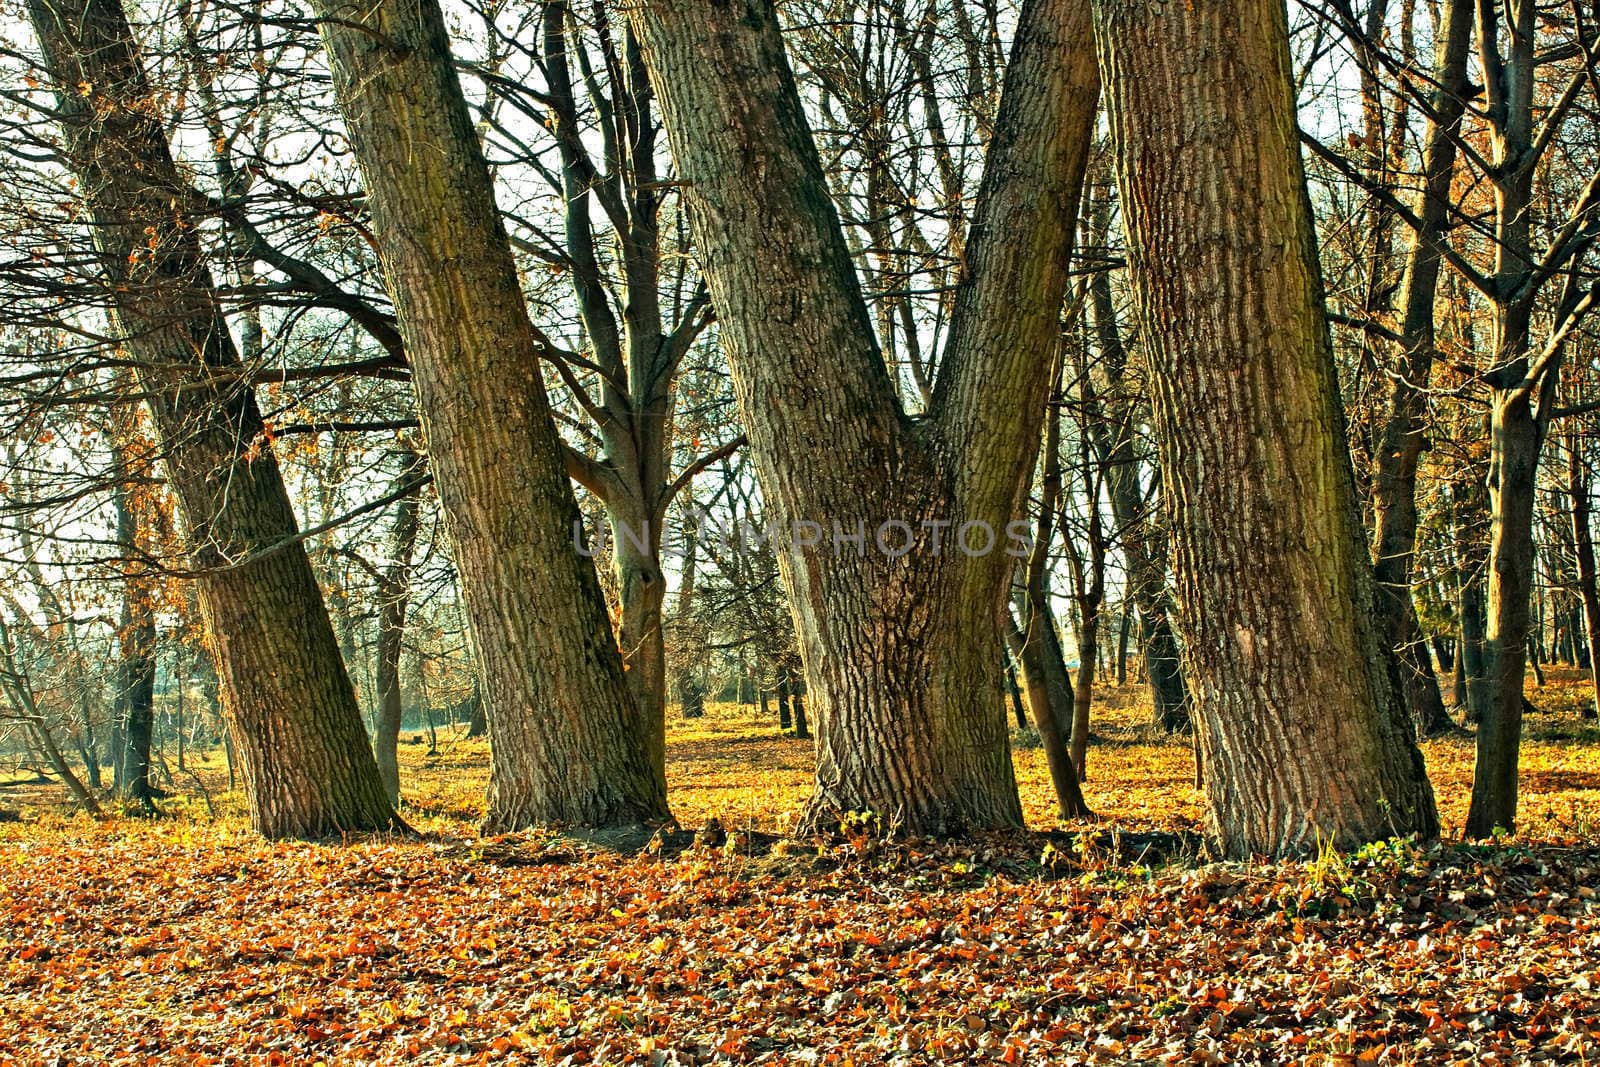 Trunks of large old trees in the park